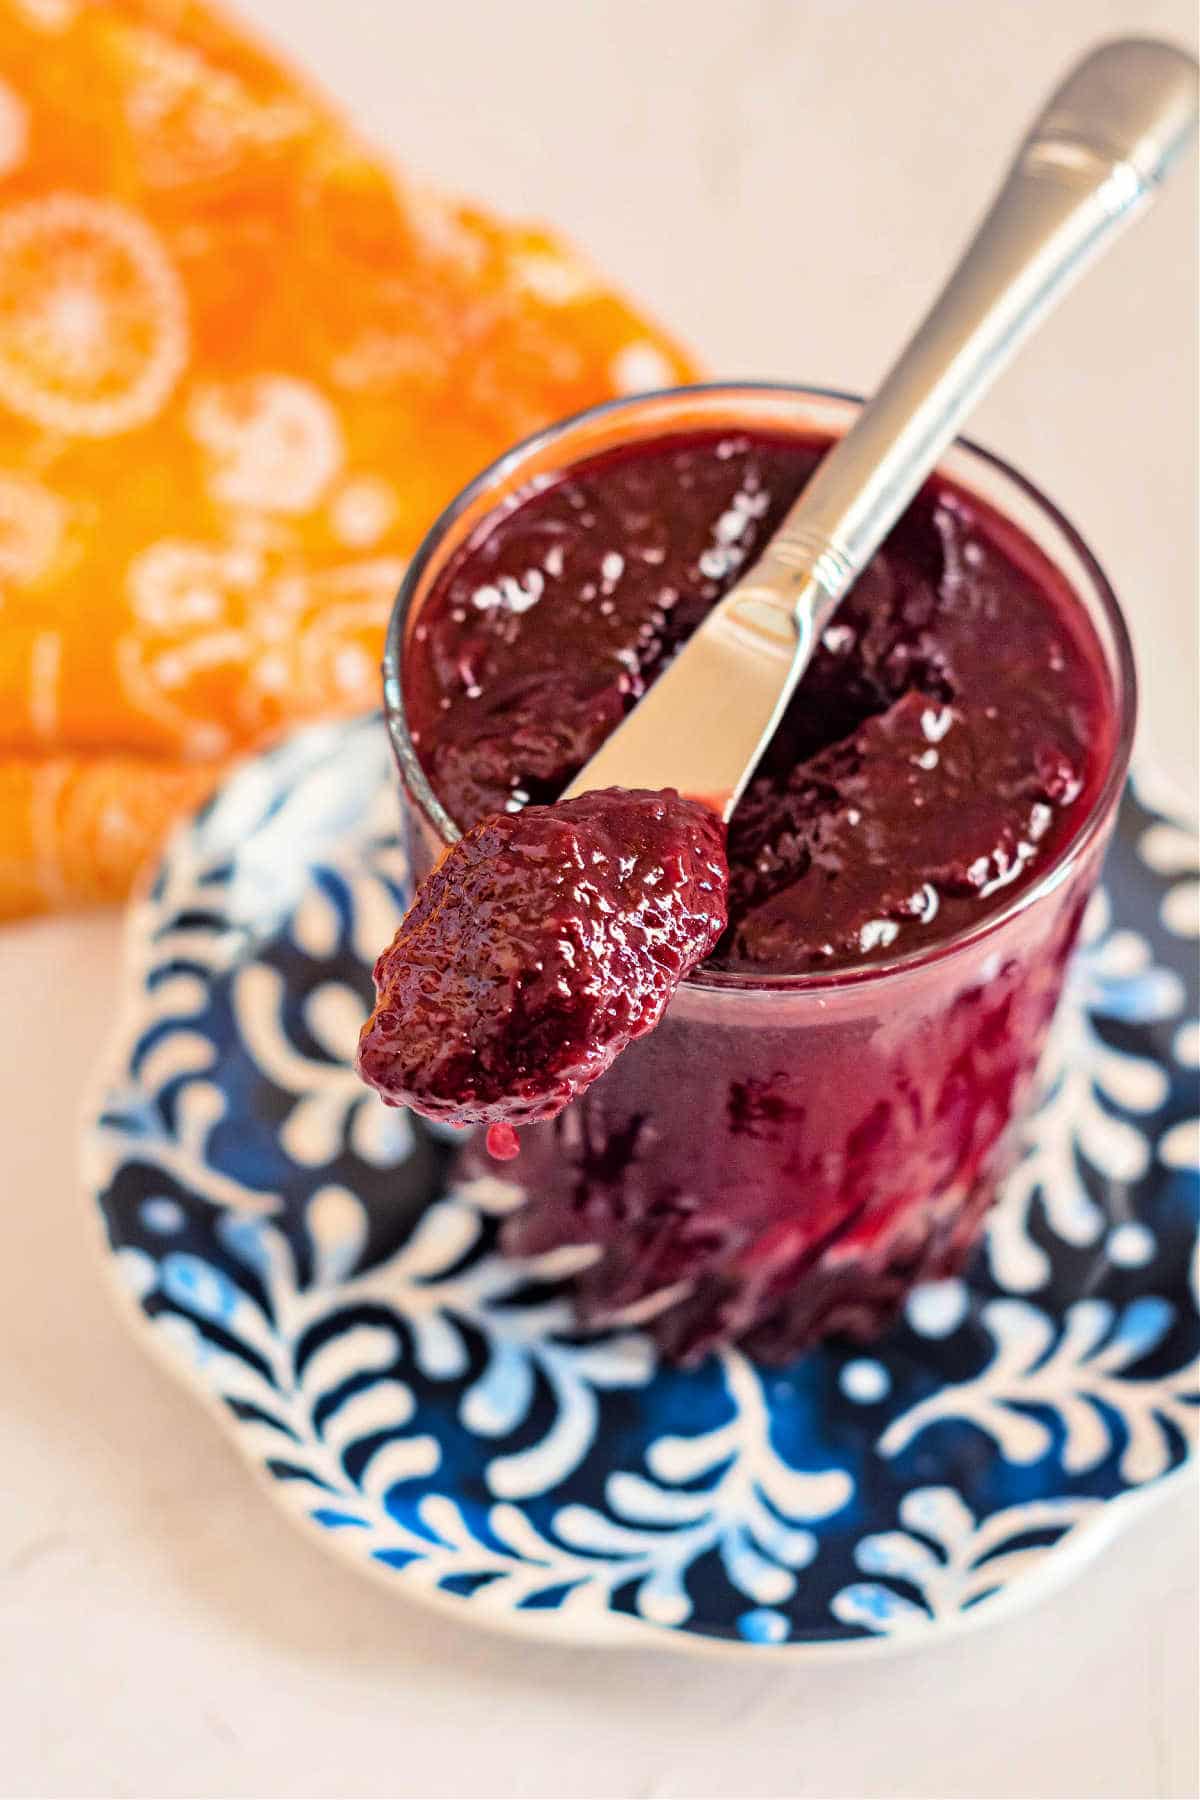 A jar of plum jam with a knife in it.